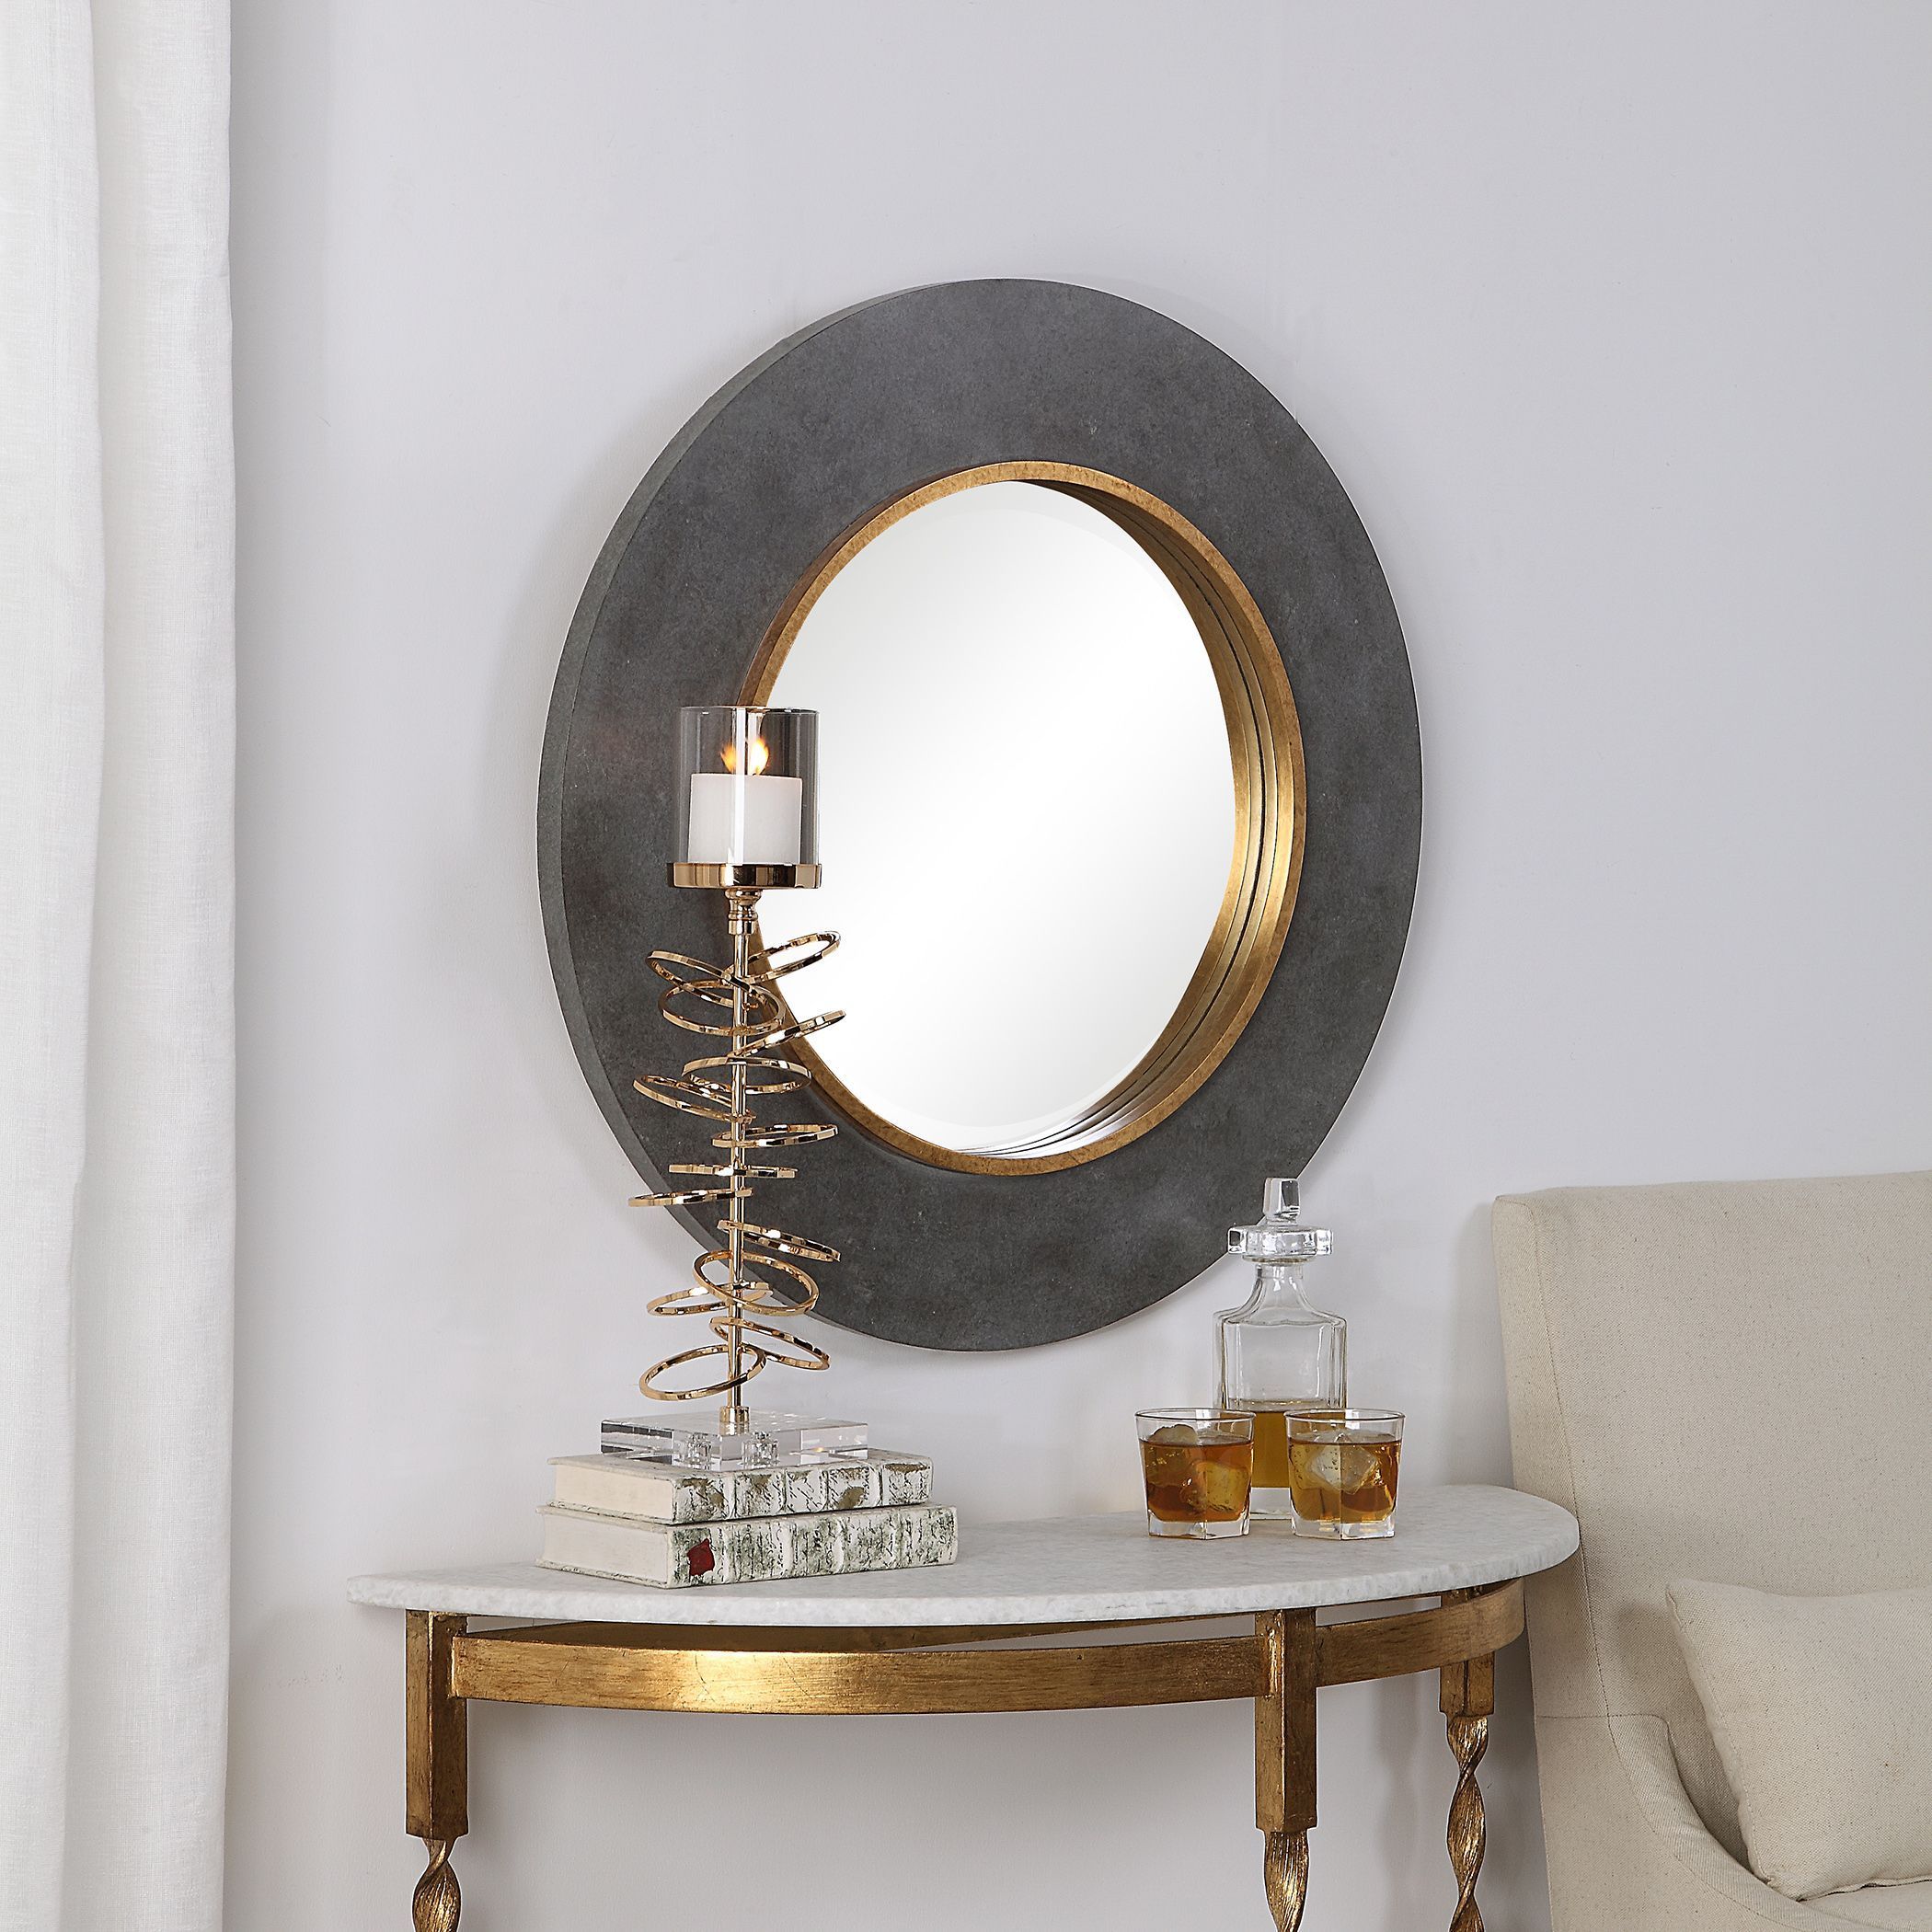 Large Round Wood Beveled Wall Mirror Contemporary Charcoal Concrete Inside Round Grid Wall Mirrors (View 4 of 15)